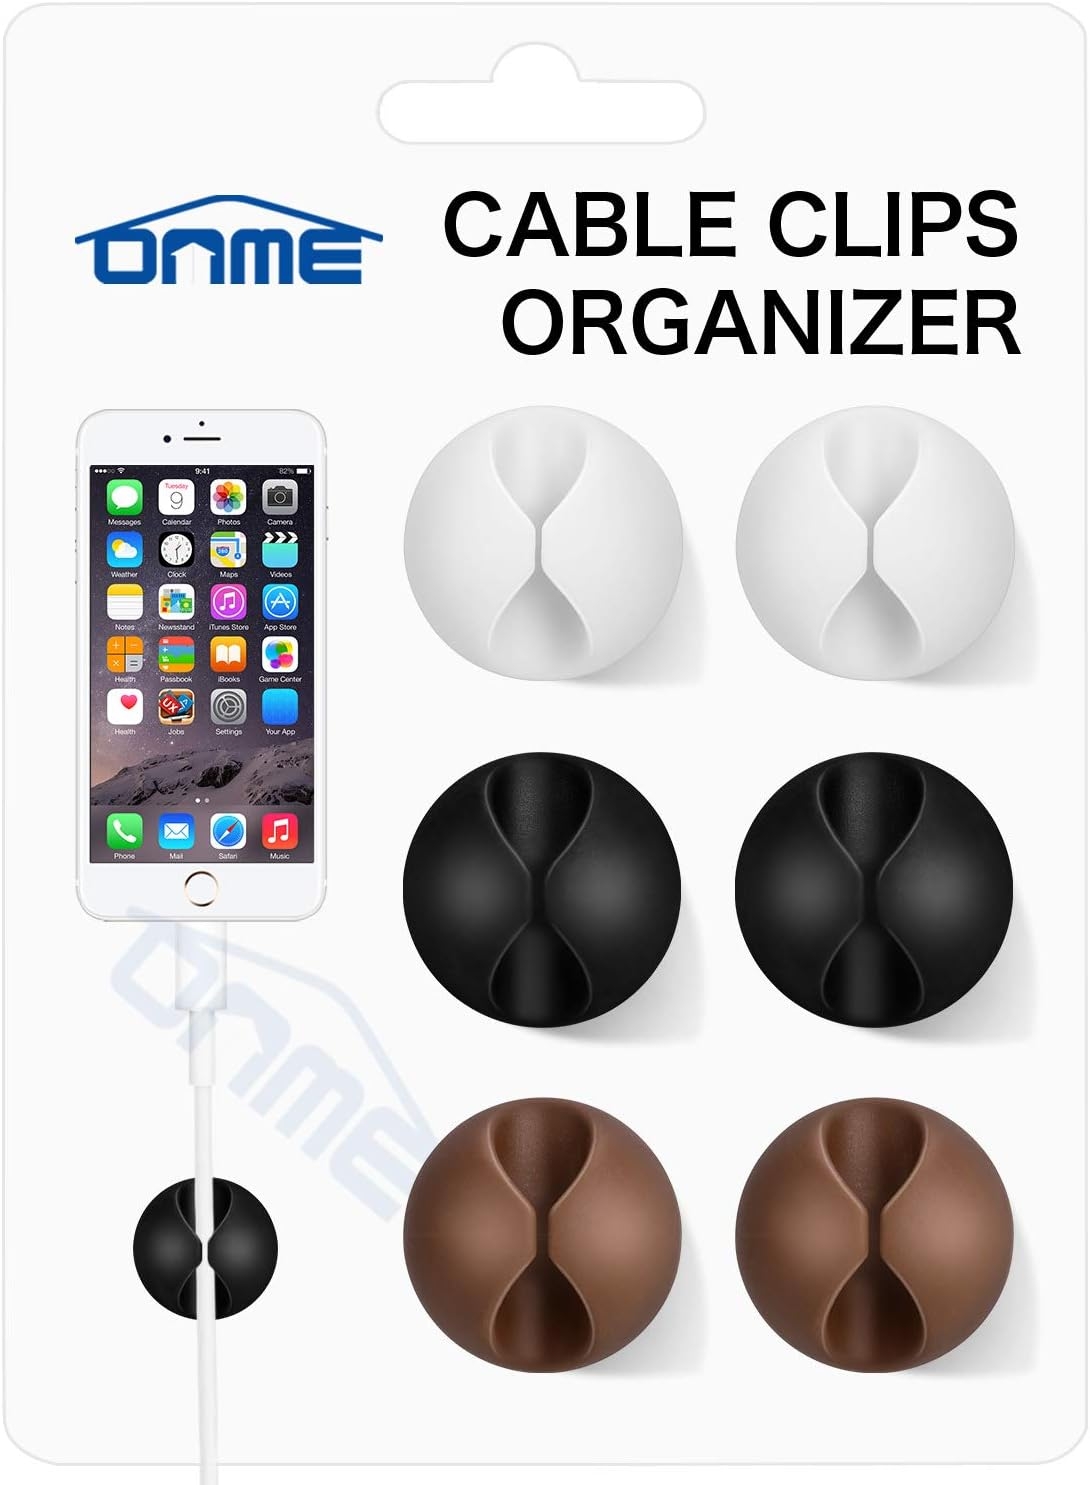 Cable Clips, ONME Cable Holder Multipurpose Cord Management for Home Non-Toxic Rubber Material Self-Adhesive Desk Cord Clips Durable Cord Organizer Black Cord Holder for Office (3 Colors 6pcs)